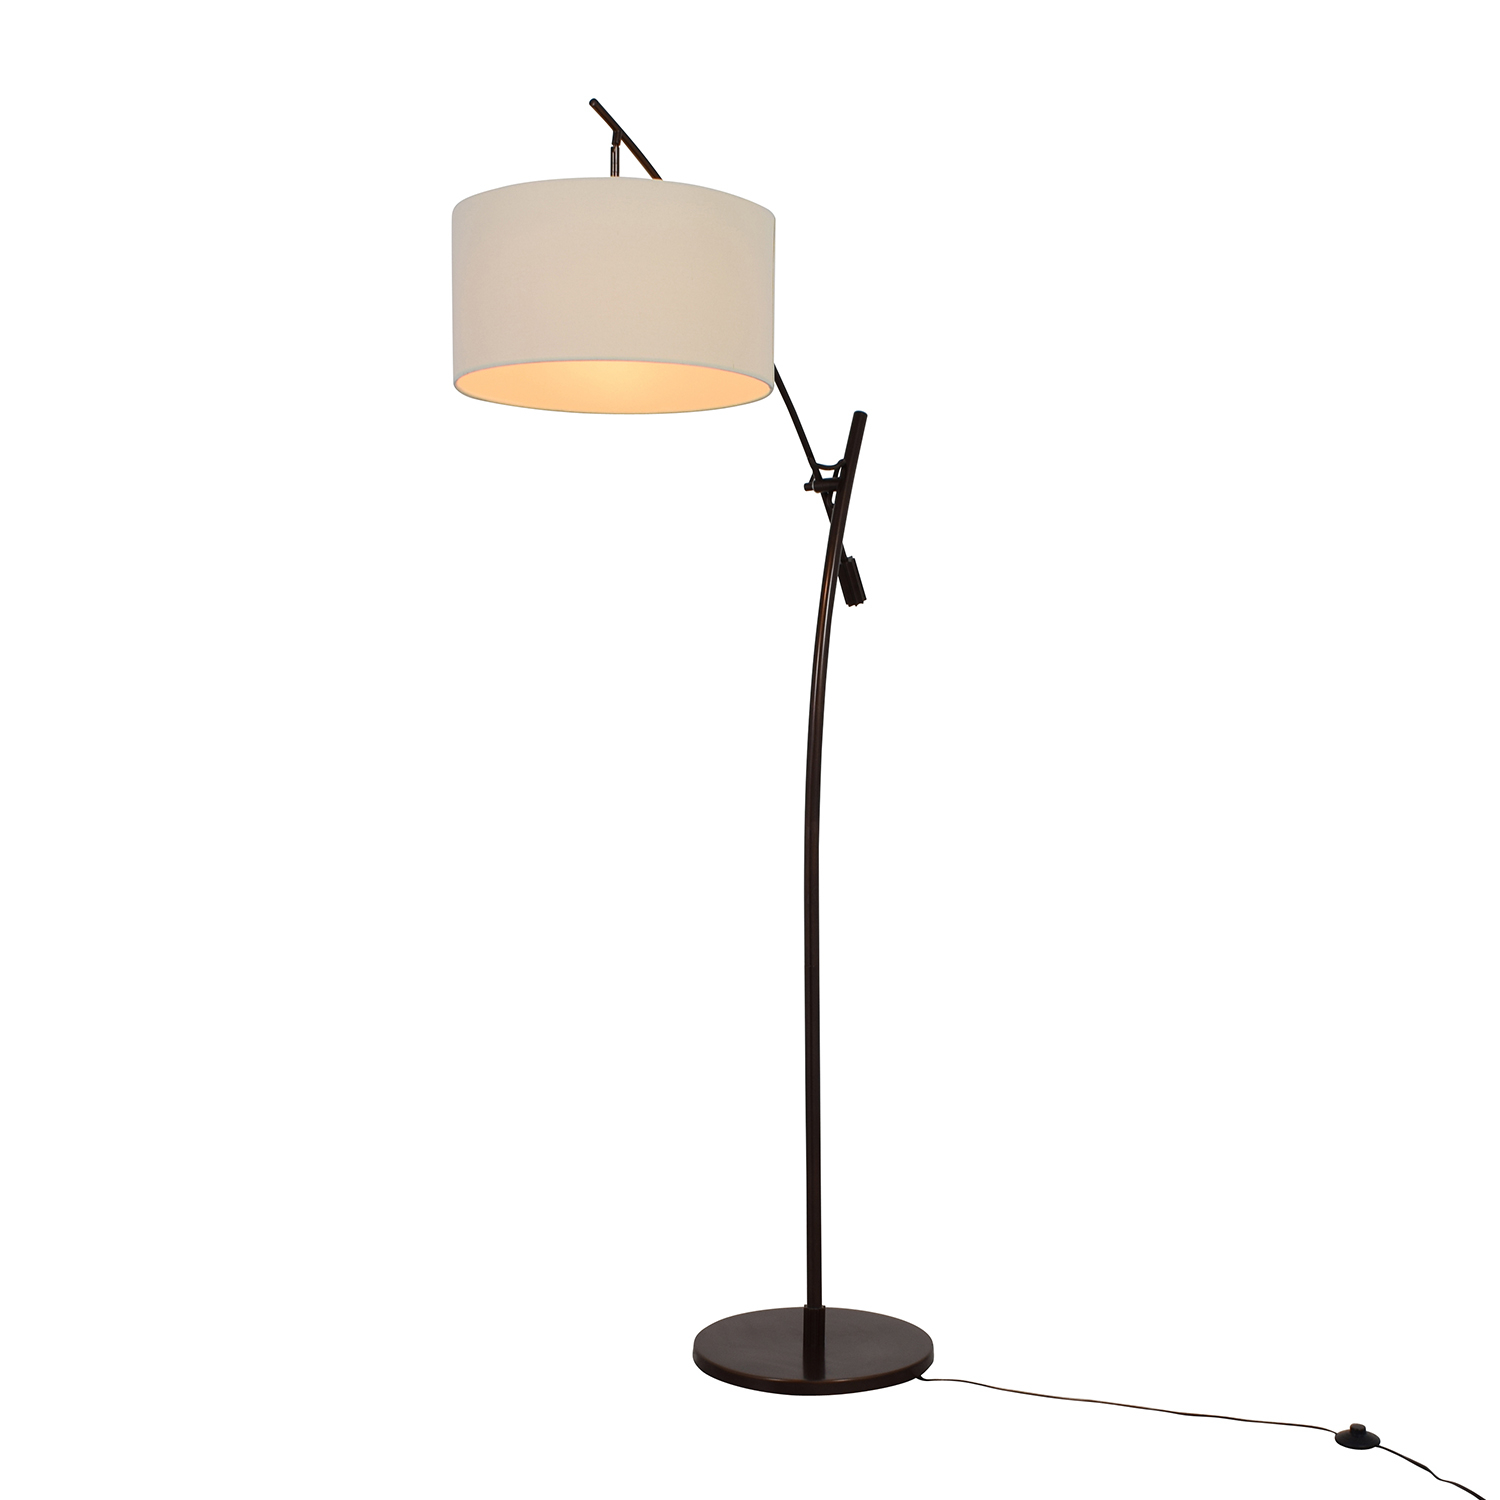 39 Off Levar Bronze Boom Arc Floor Lamp With Linen Shade Decor intended for sizing 1500 X 1500